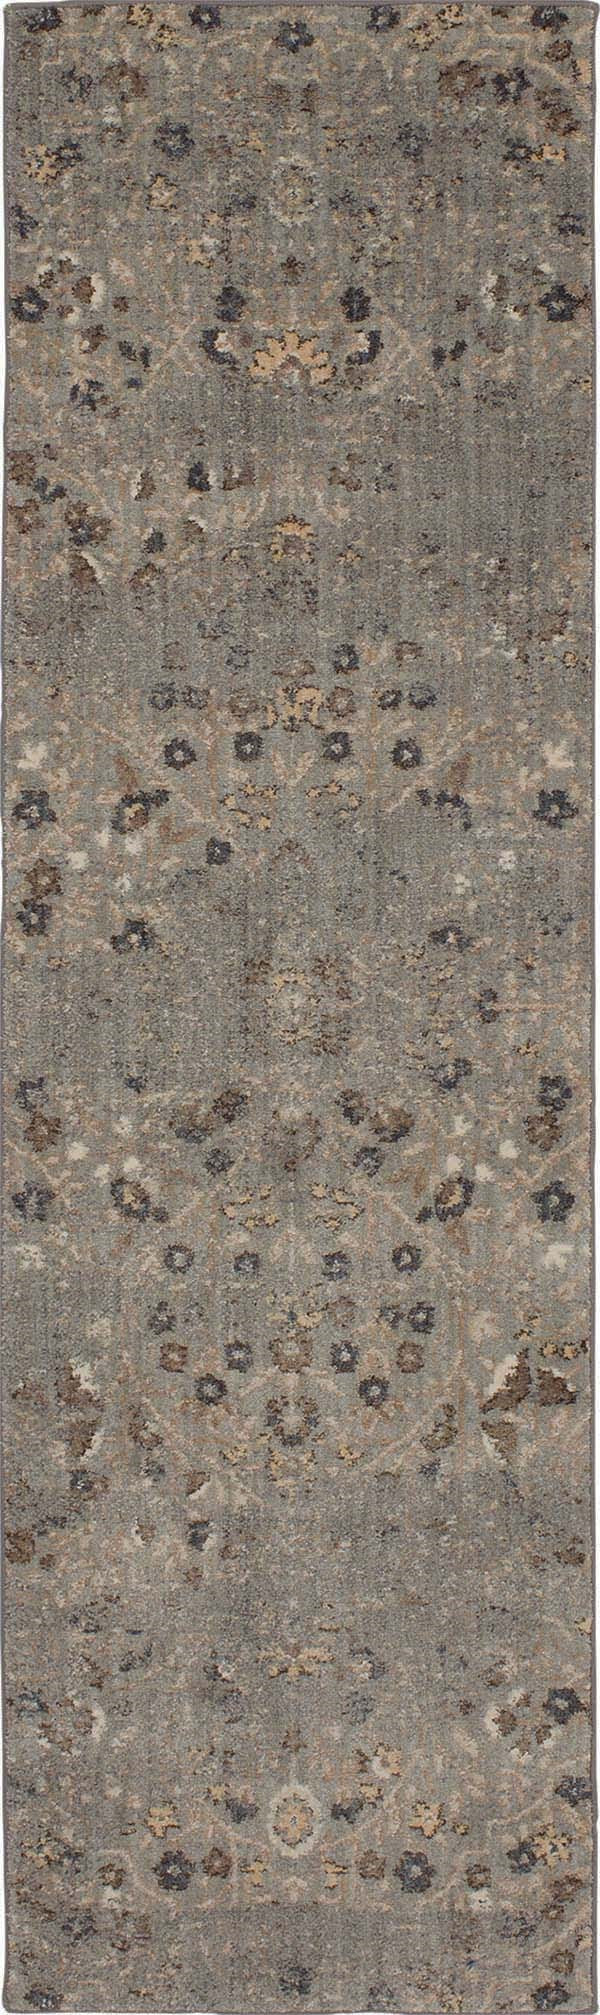 Pet Friendly Touchstone Eme Willow Grey Rug stain proof stain resistant area rug online pet proof karastan